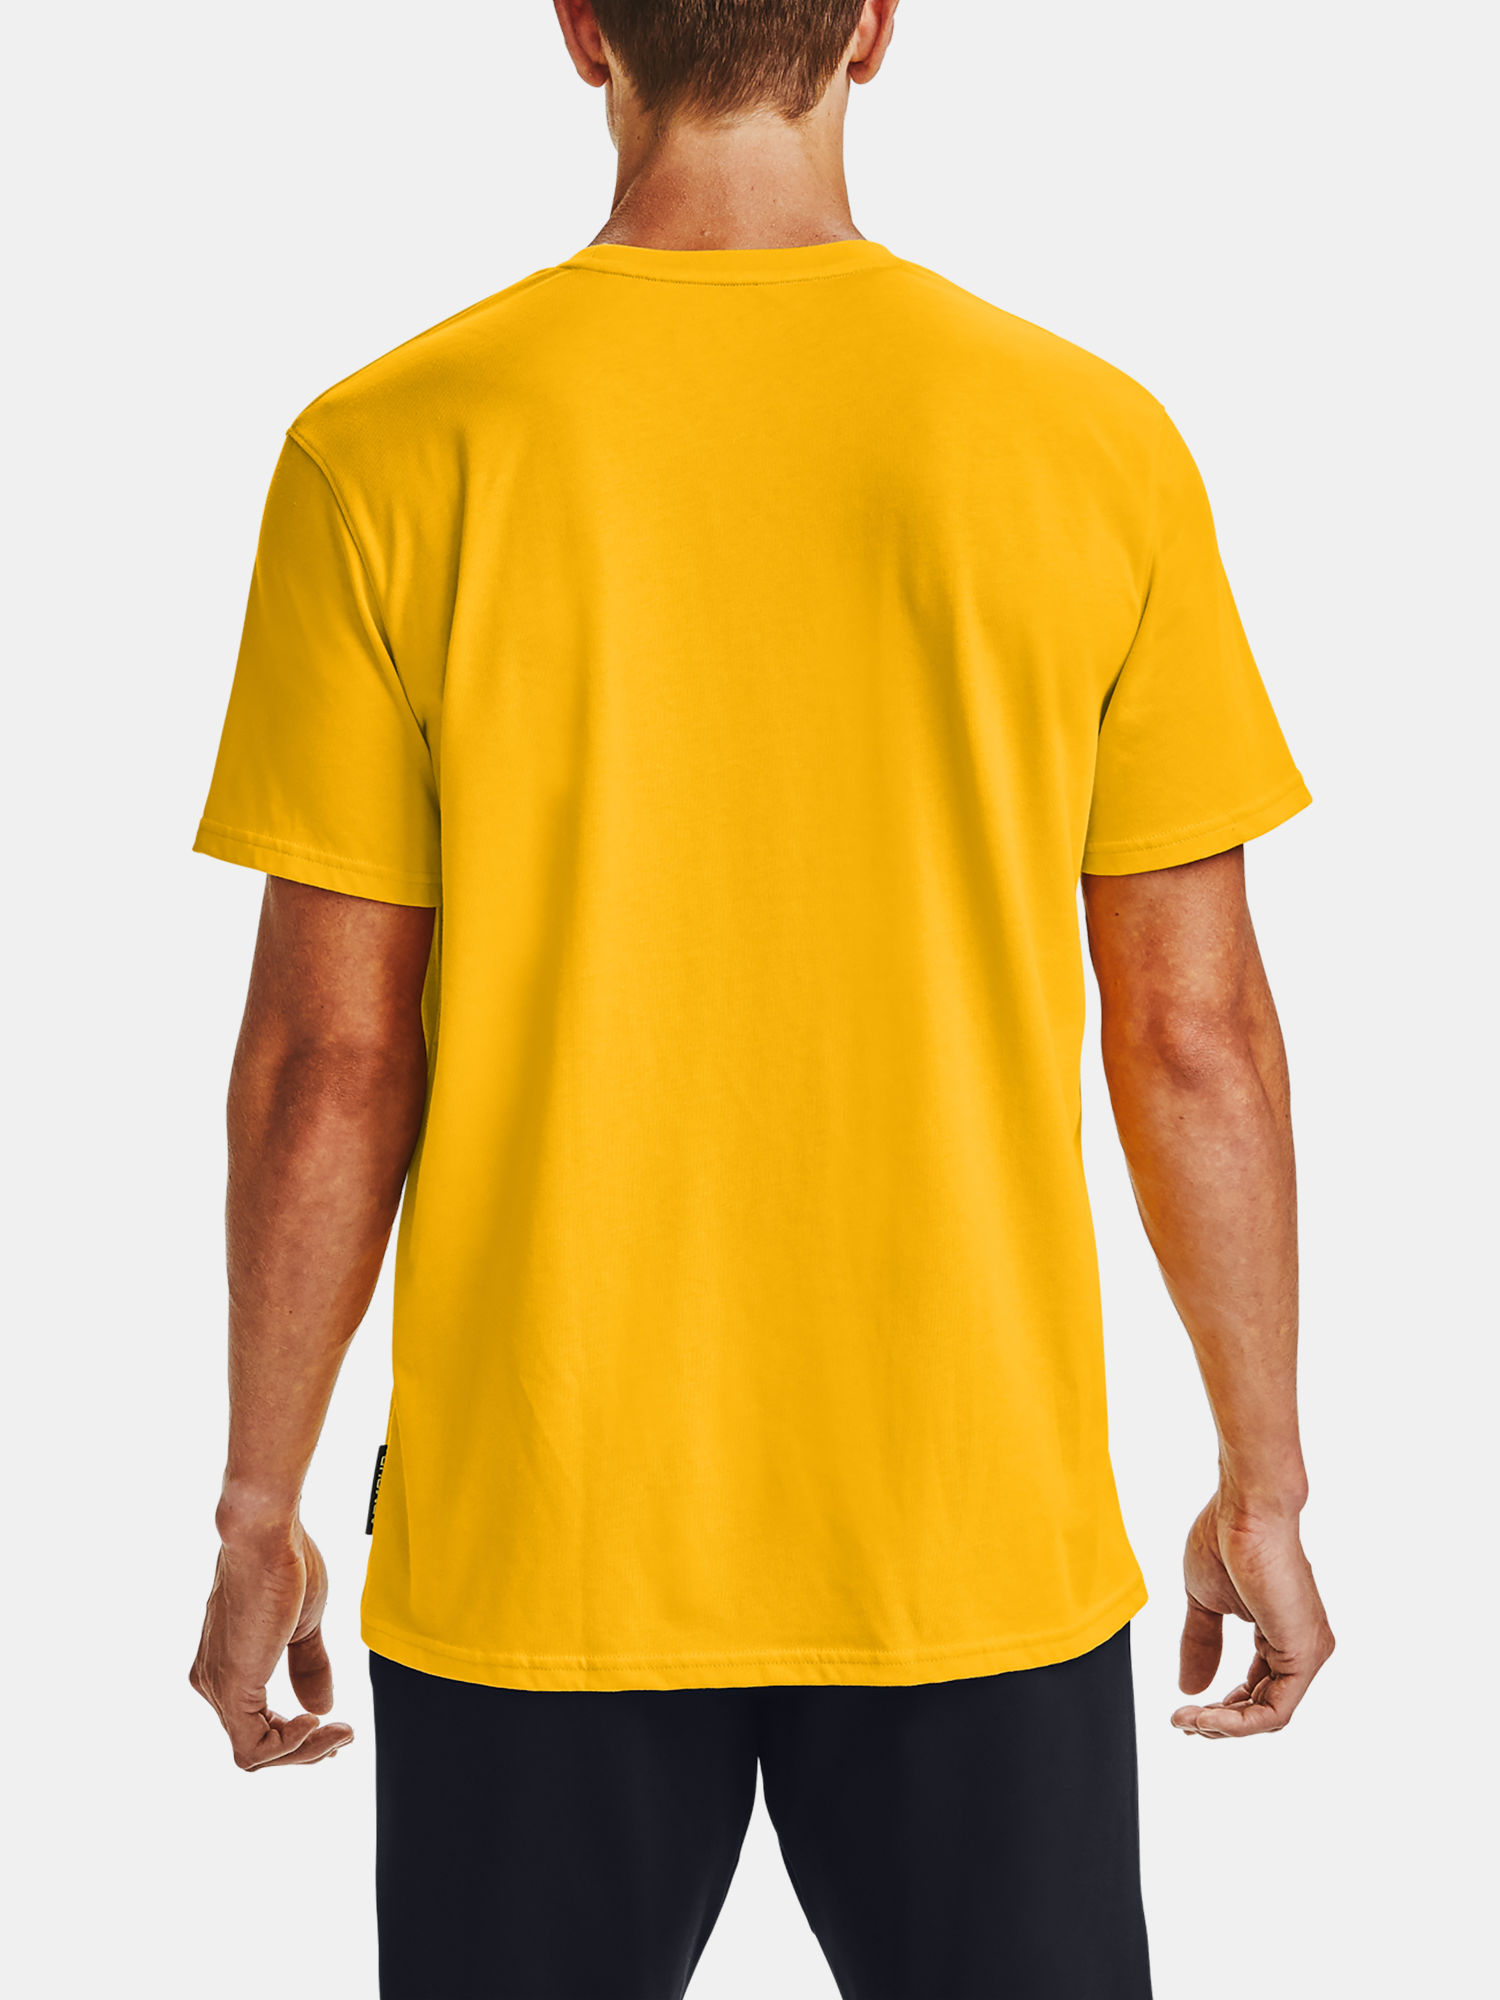 Tričko Under Armour CURRY EMBROIDERED TEE-YLW (2)